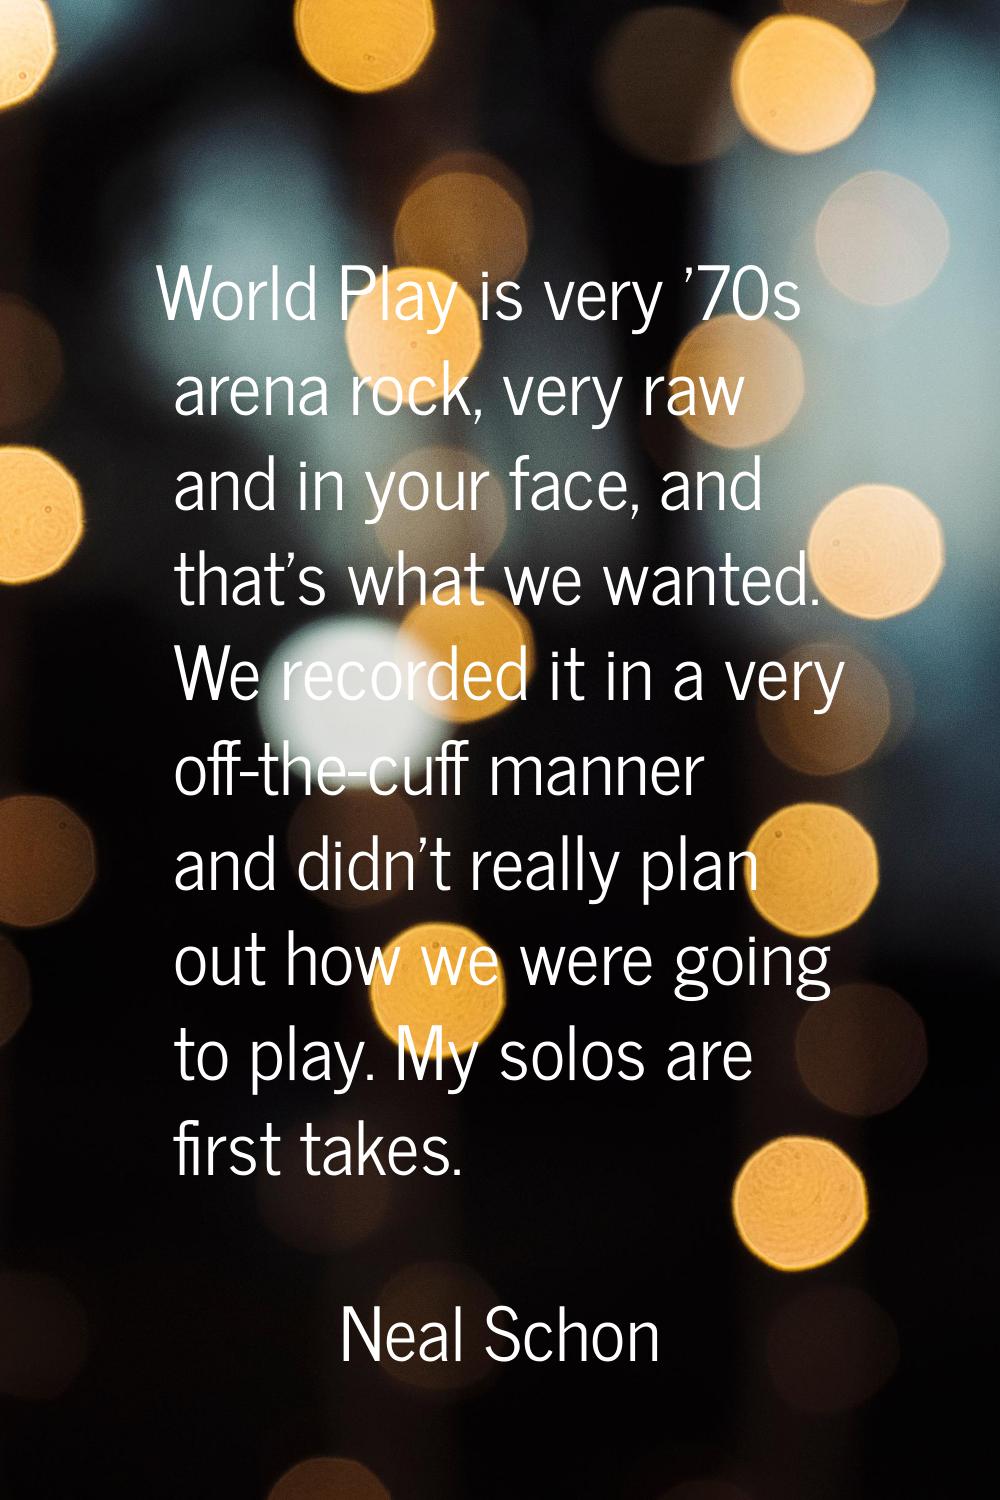 World Play is very '70s arena rock, very raw and in your face, and that's what we wanted. We record